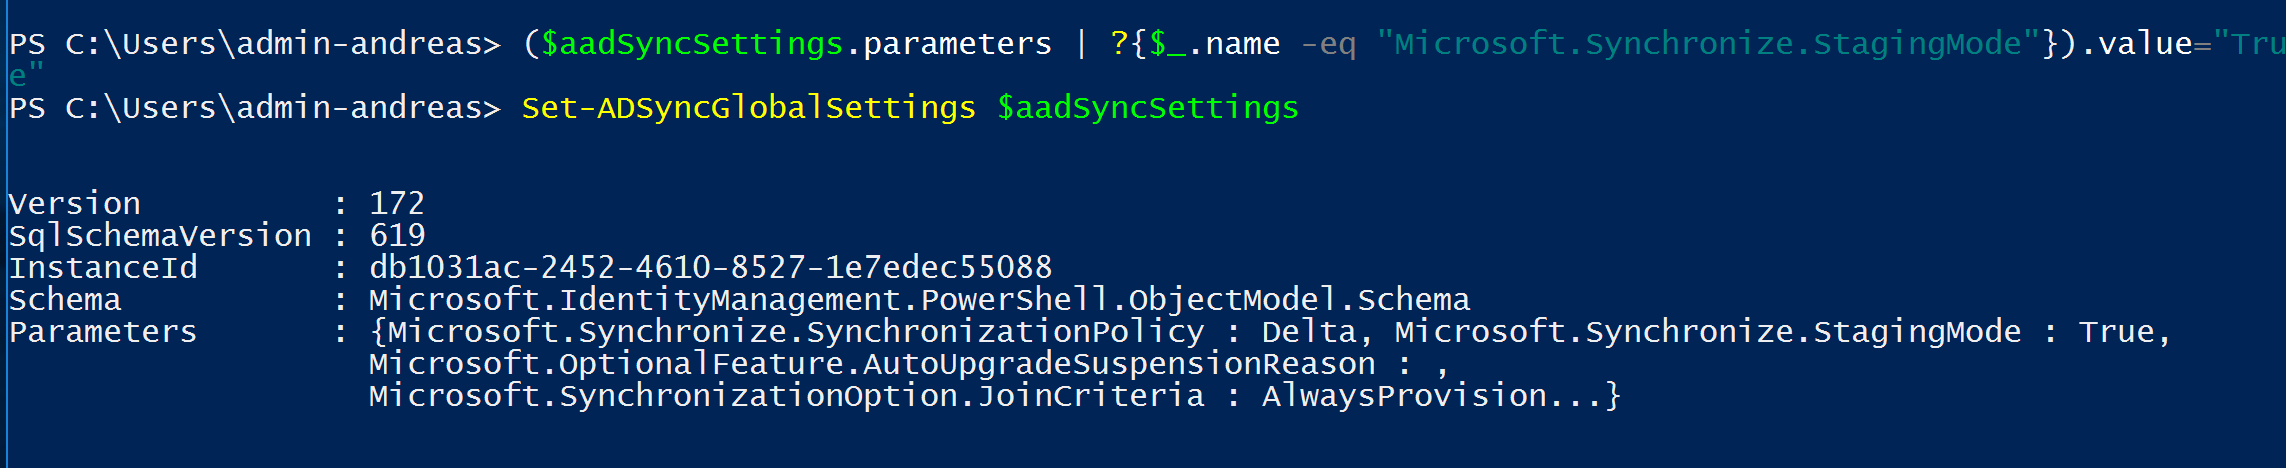 Screenshot of PowerShell Code Execution - Changing and setting the Staging mode